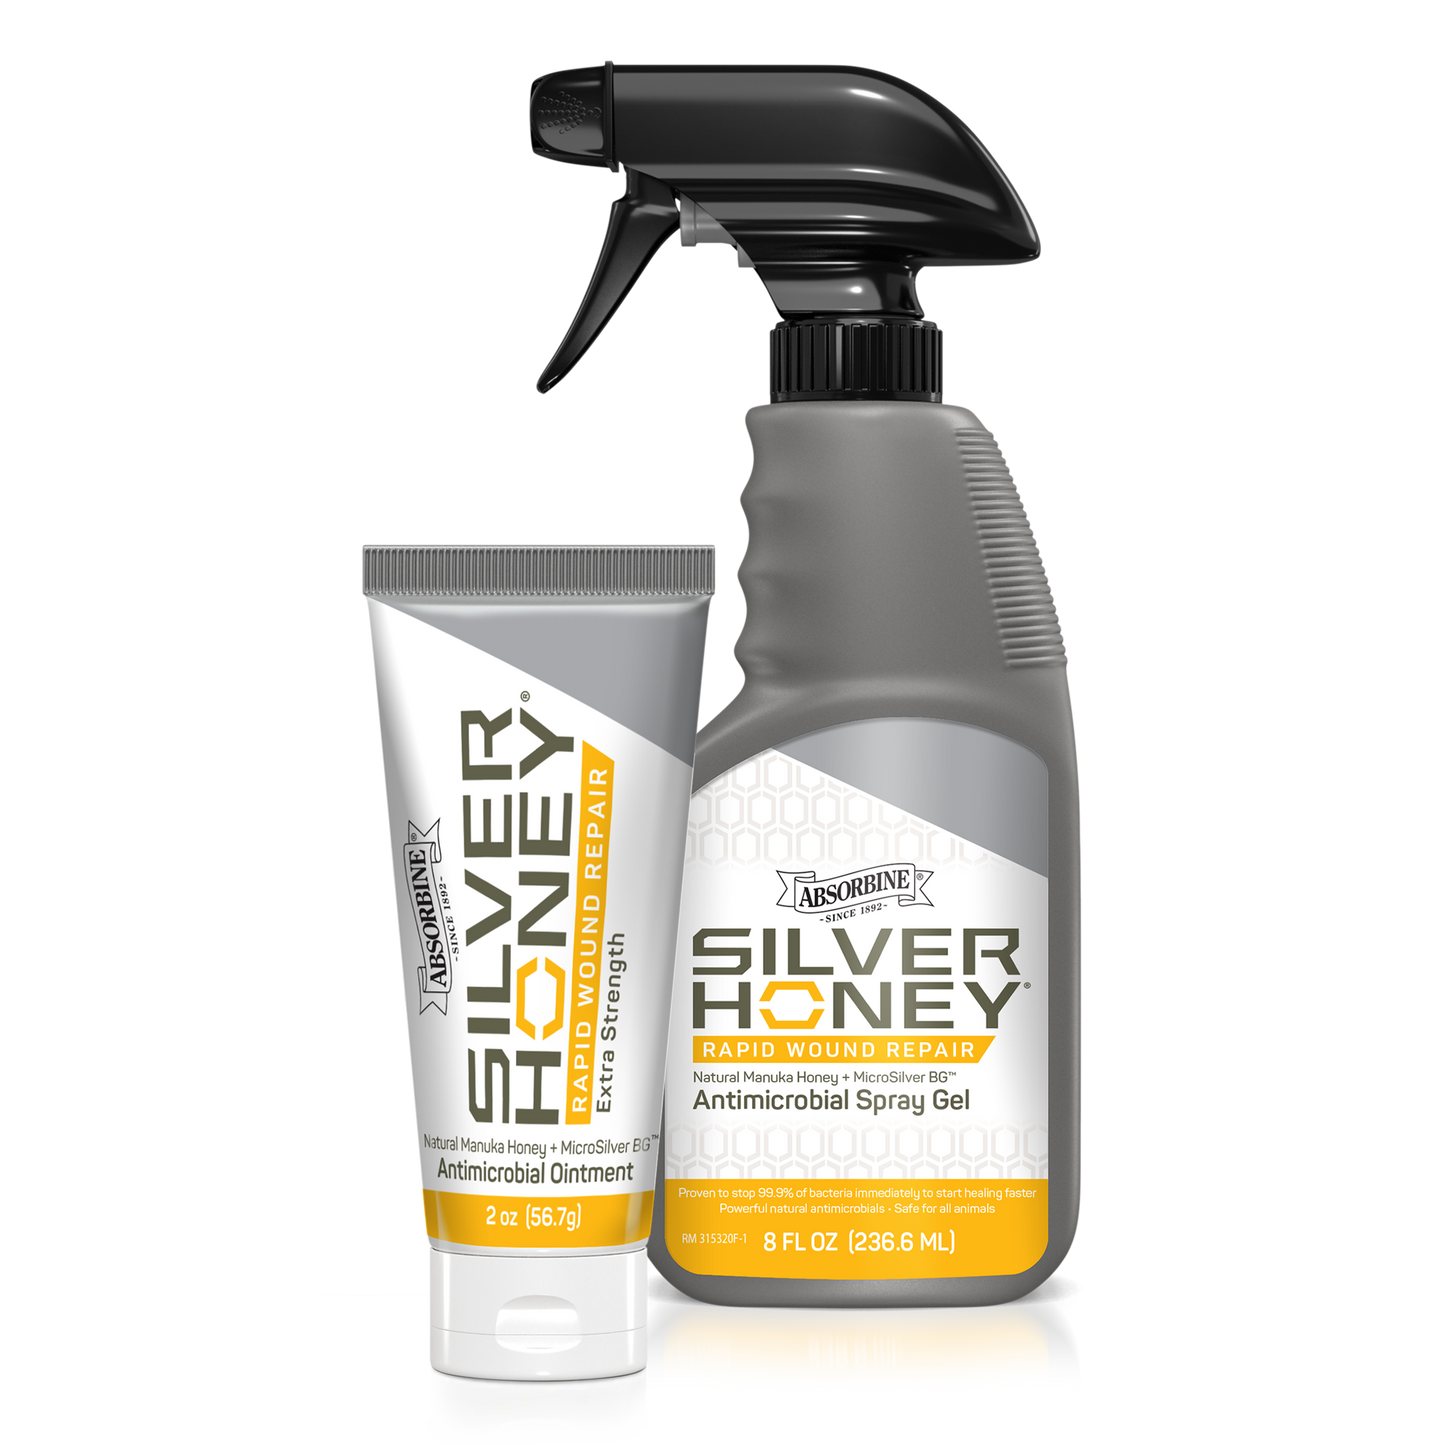 Silver Honey Rapid Wound Repair combo pack.  Silver Honey extra strength 2 ounce ointment on the left.  Silver Honey Rapid Wound repair Antimicrobial 8 ounce spray gel on the right.